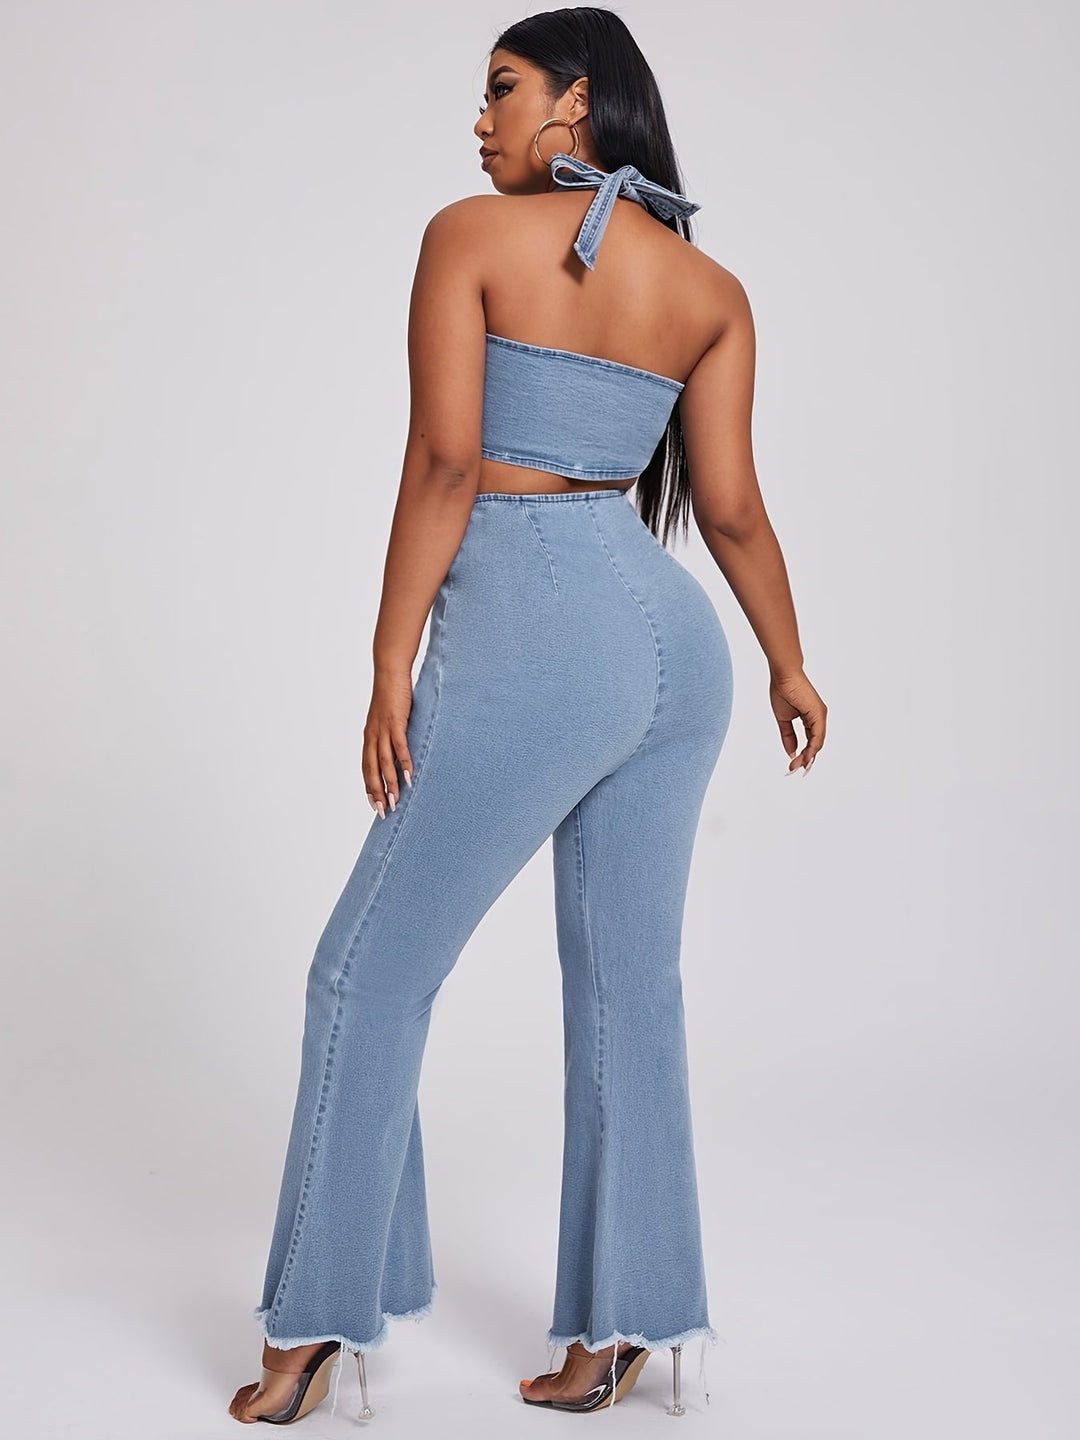 Organic Cotton Halter Crop Top and High Rise Flared Jeans Set 